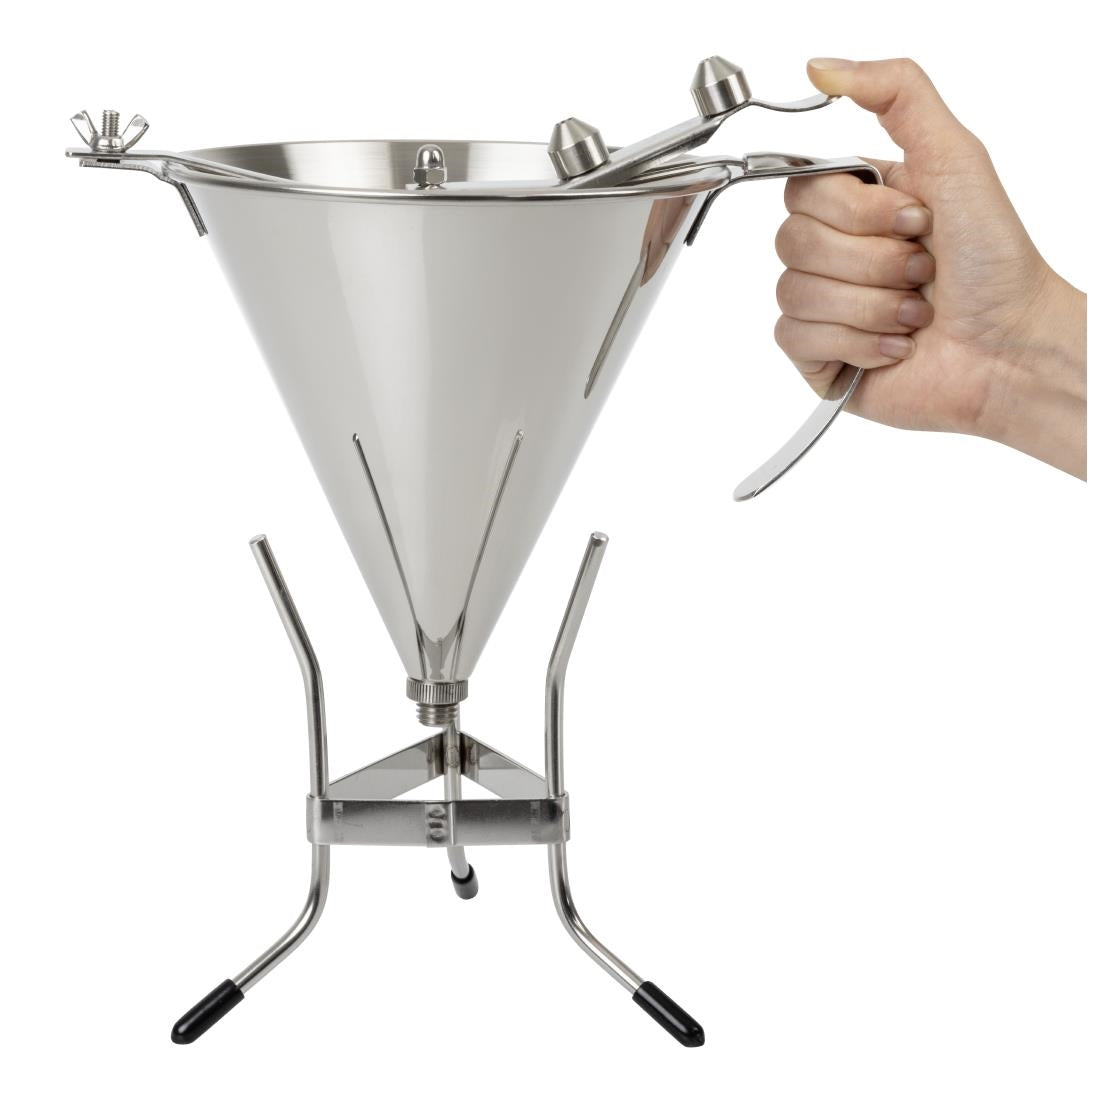 DN906 De Buyer Stainless Steel Automatic Piston Funnel 1.5ltr JD Catering Equipment Solutions Ltd